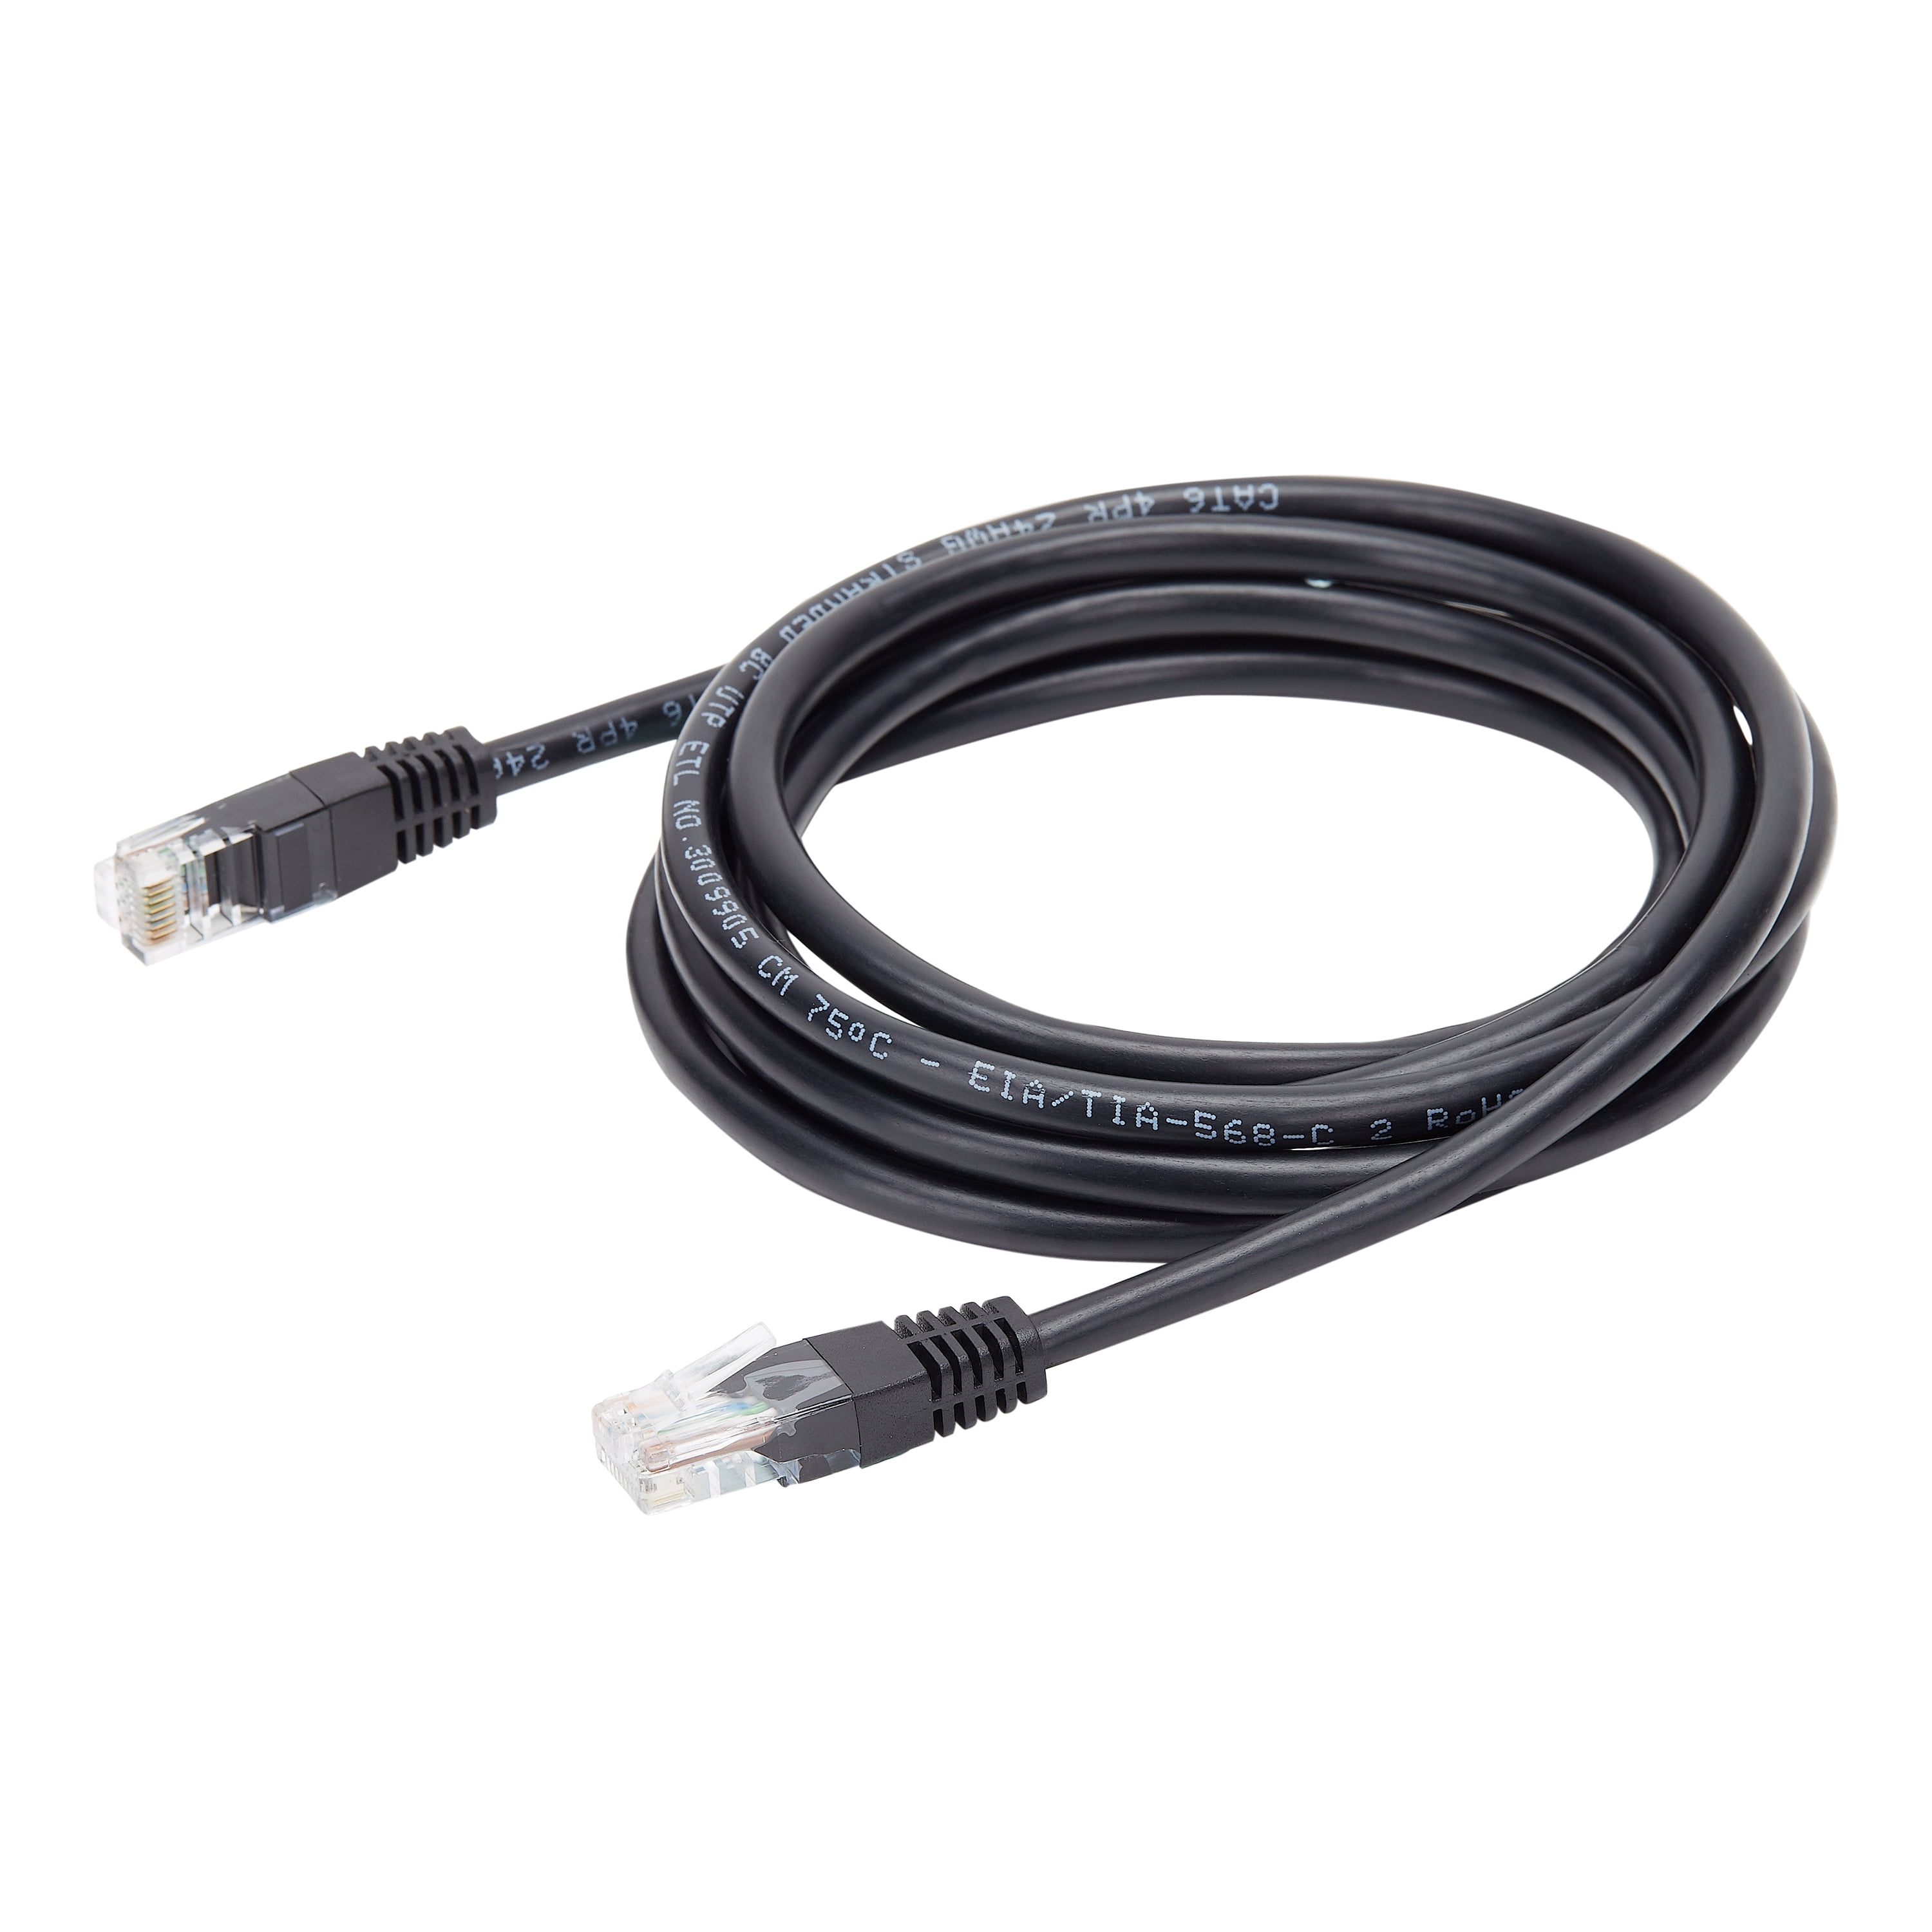 onn. CAT6 Networking Cable 7 ft (2.1 m)